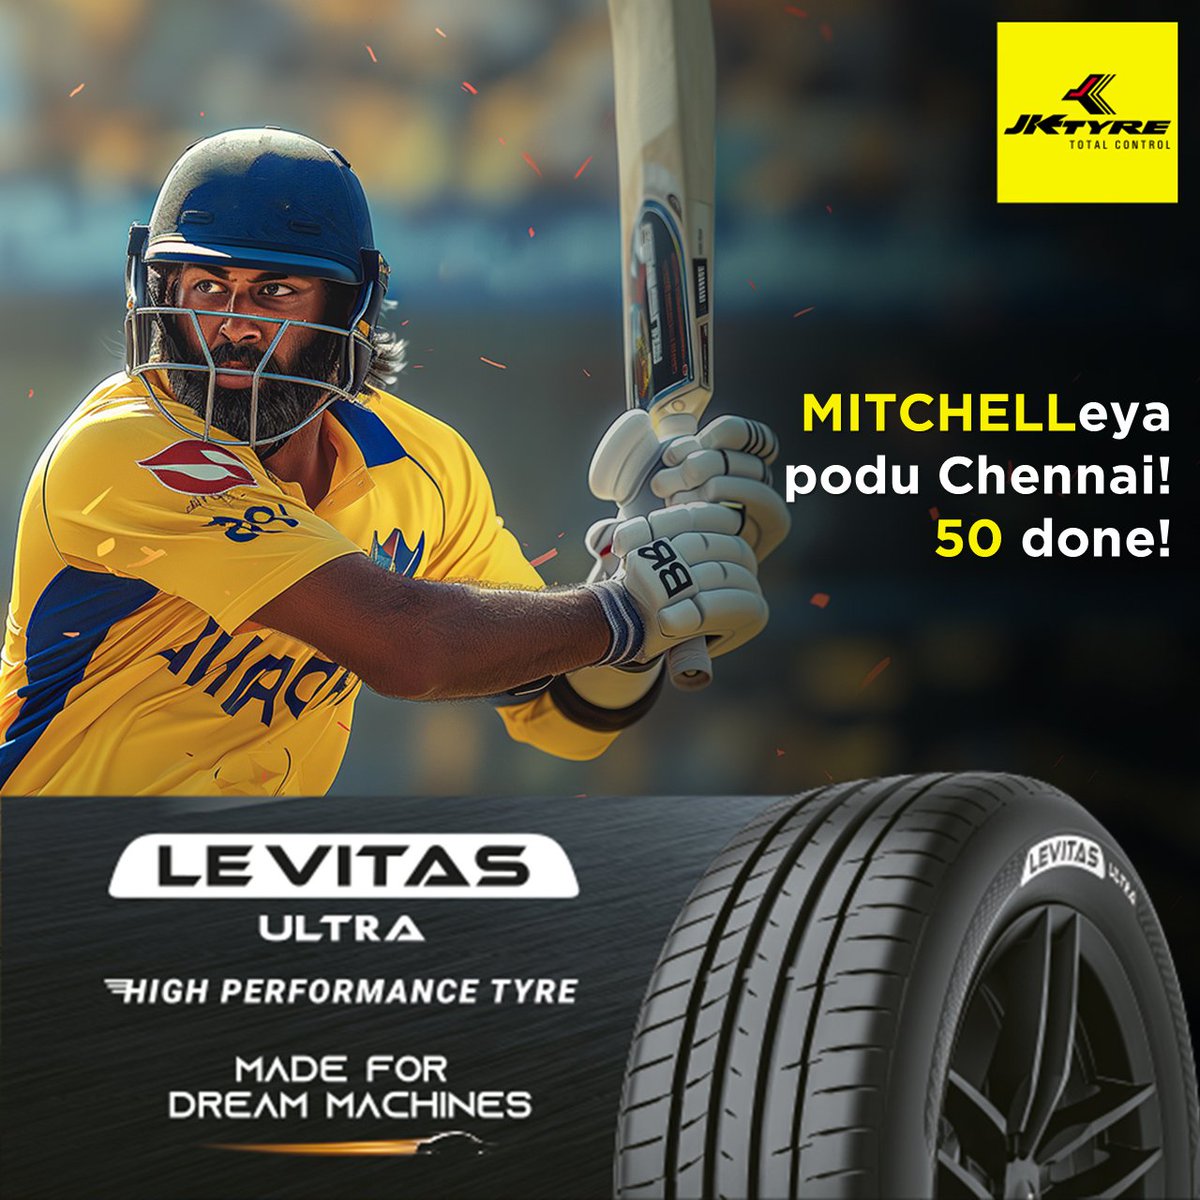 A premium display of batting prowess by this Super King! Switch to this #Levitas Ultra Tyre, from JK Tyre, made for dream machines, and experience premium-quality tyres and luxury-class rides. #JKTyre #IndianT20League #Chennai #Hyderabad